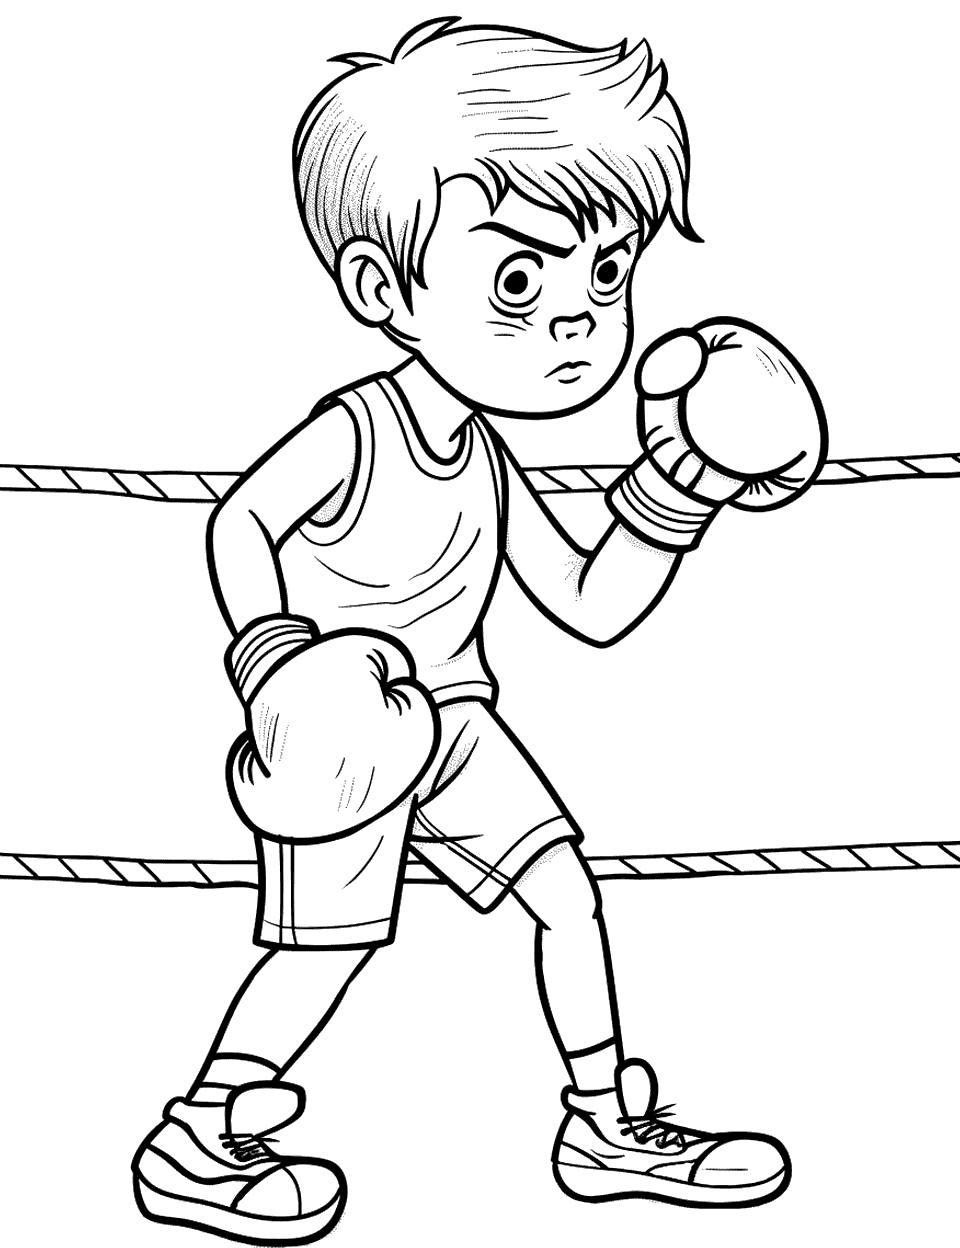 Boxing Match Begin Sports Coloring Page - A boxer in the ring, gloves up, ready to start the match.